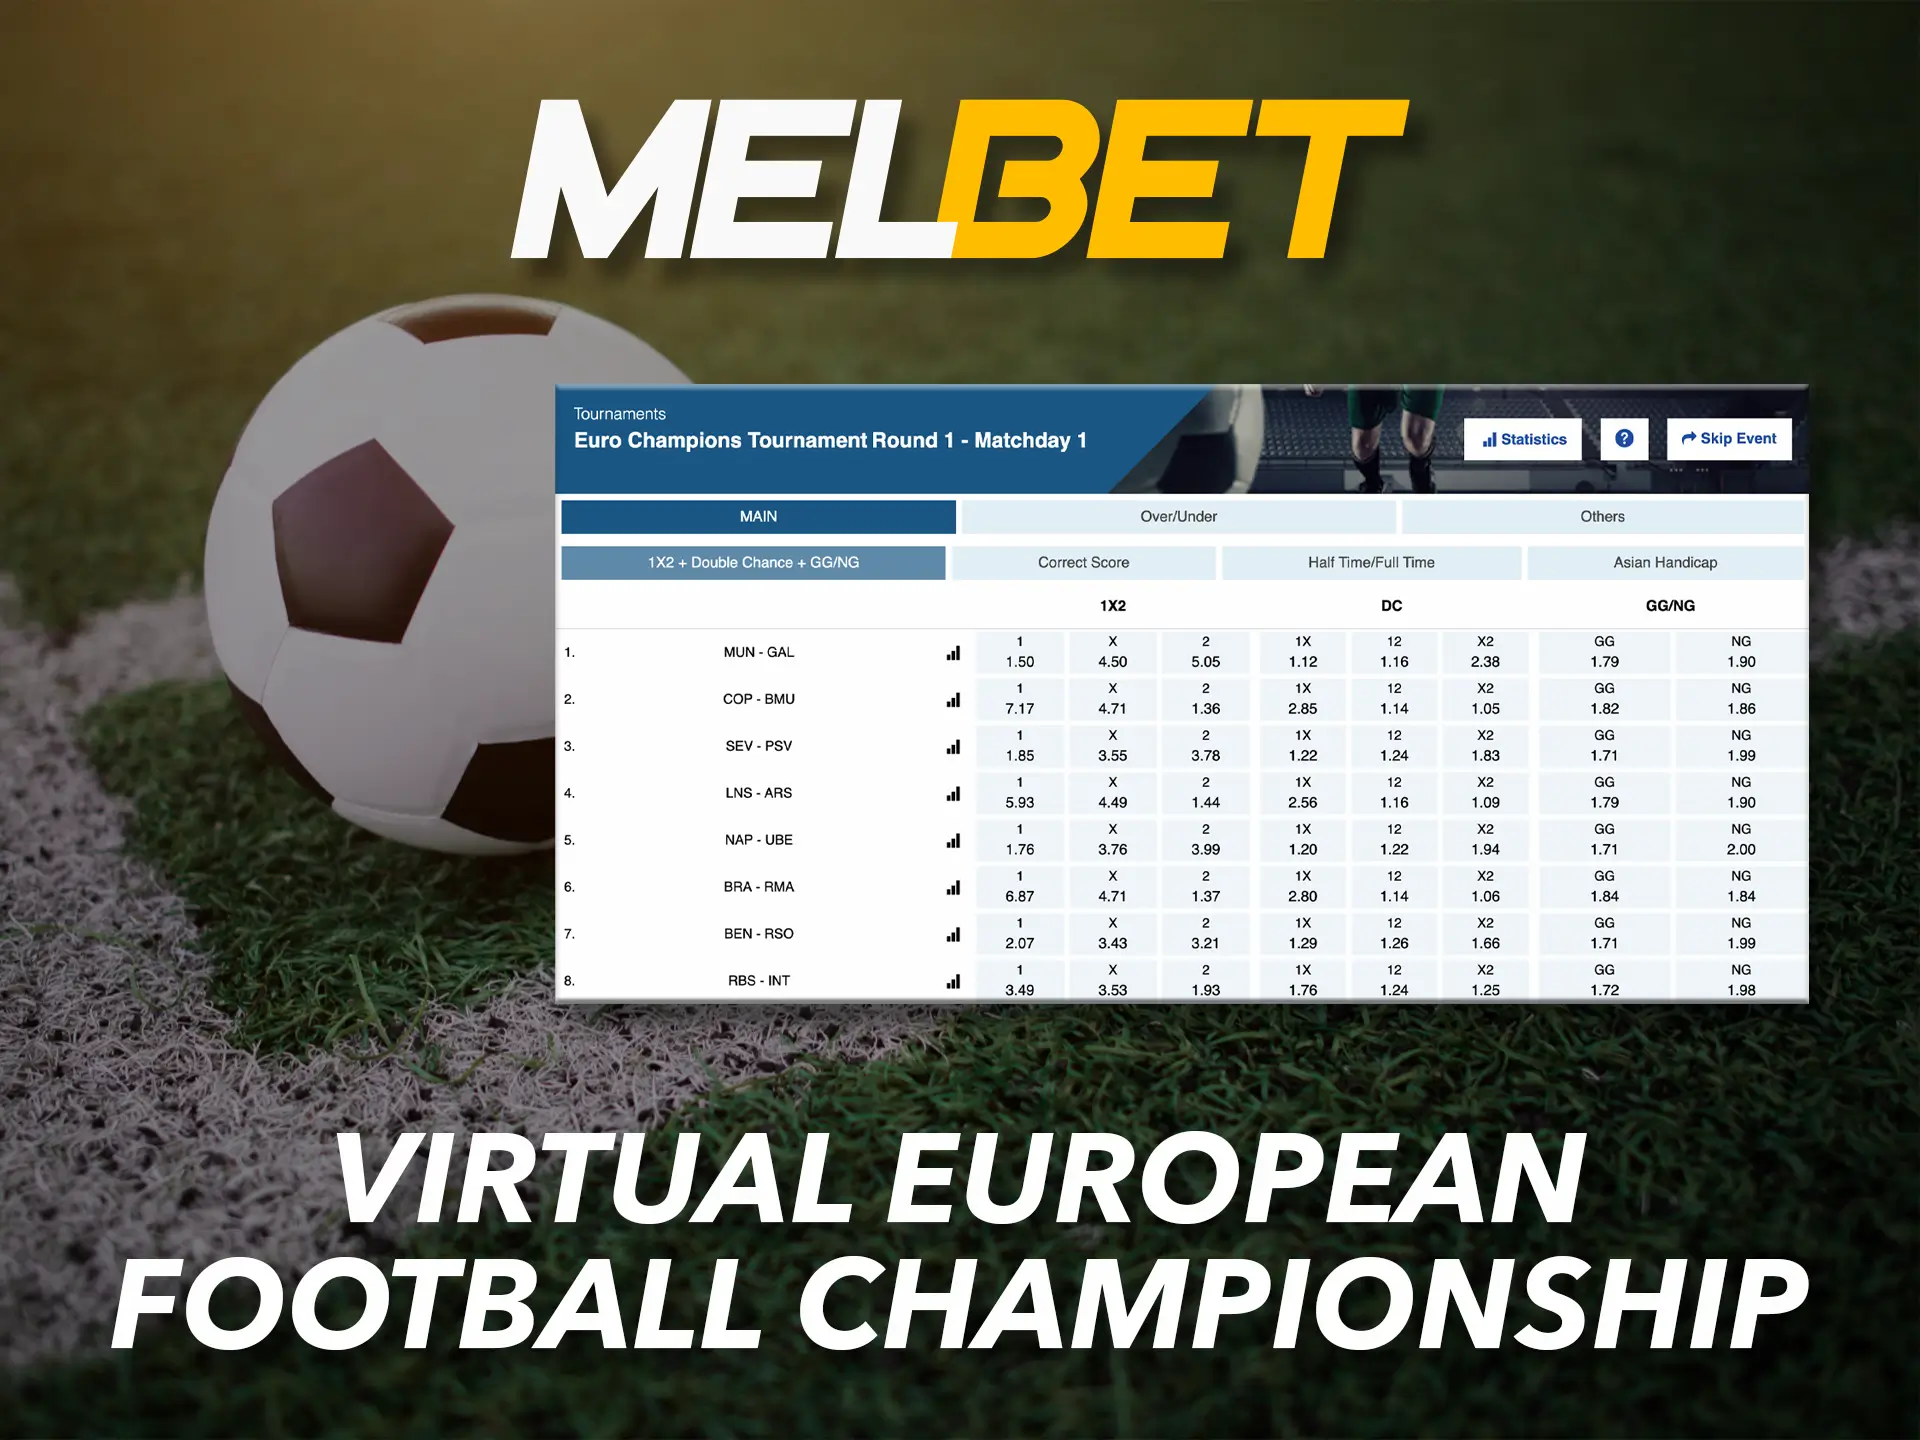 There is a Melbet virtual football game every two minutes.